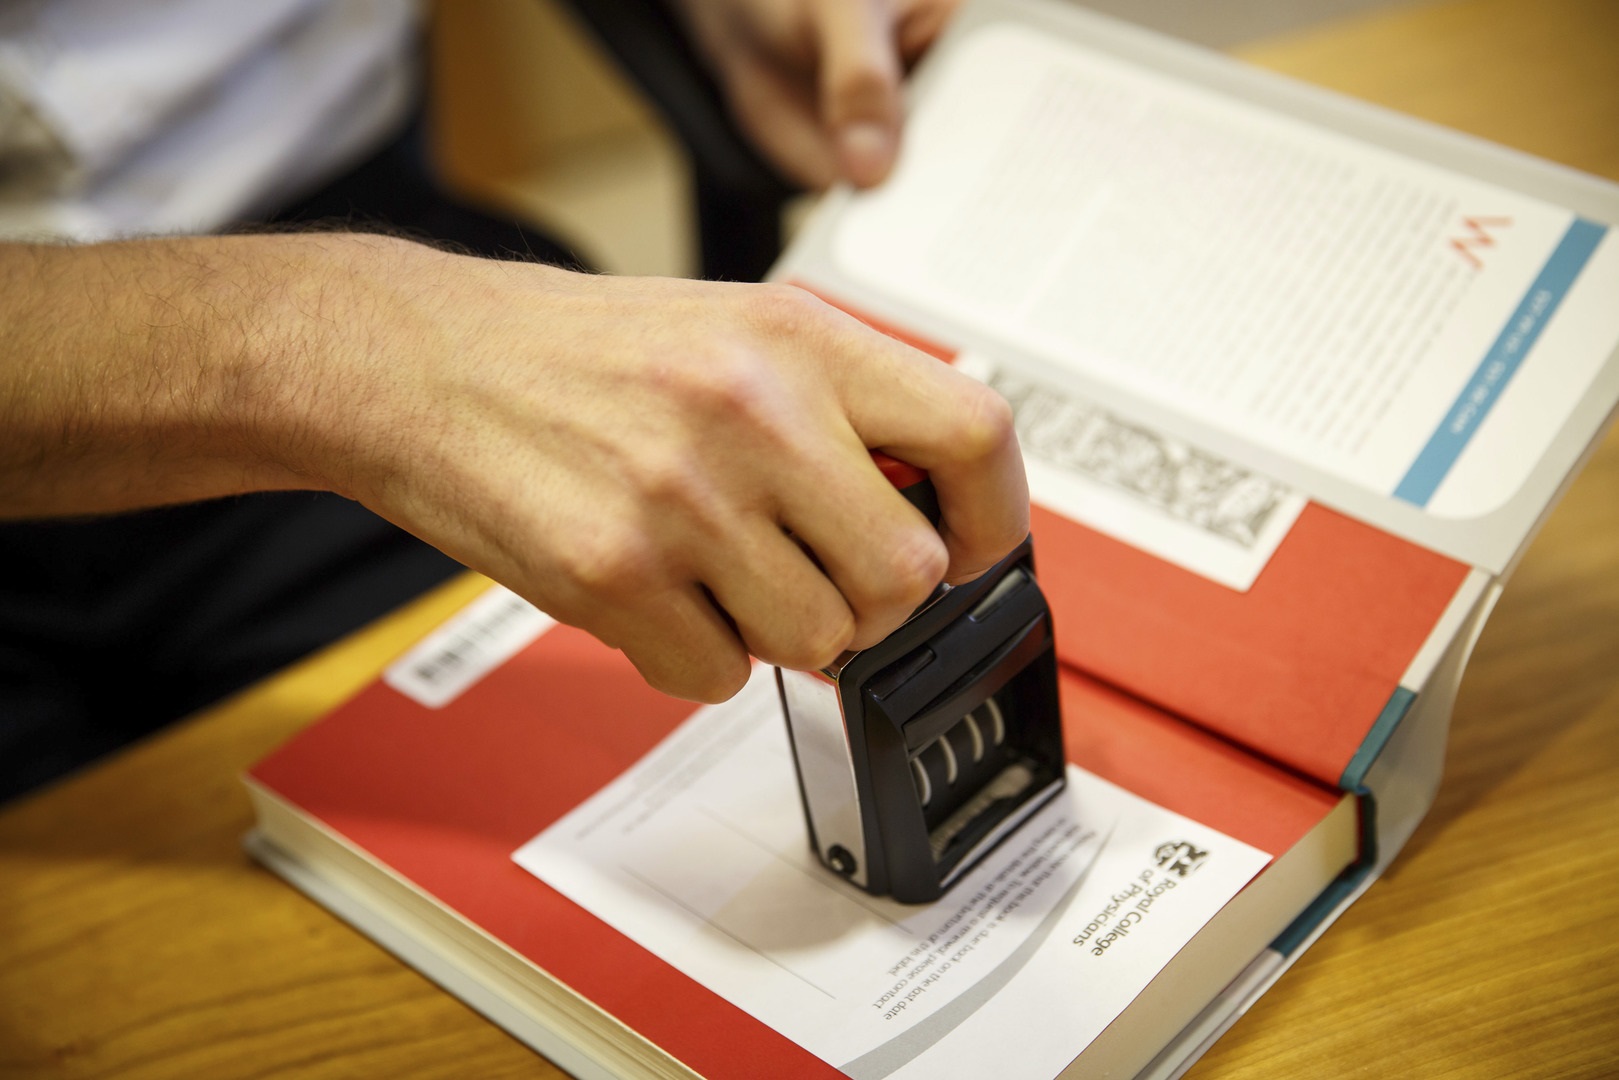 A librarian stamping a book when a student is borrowing it.